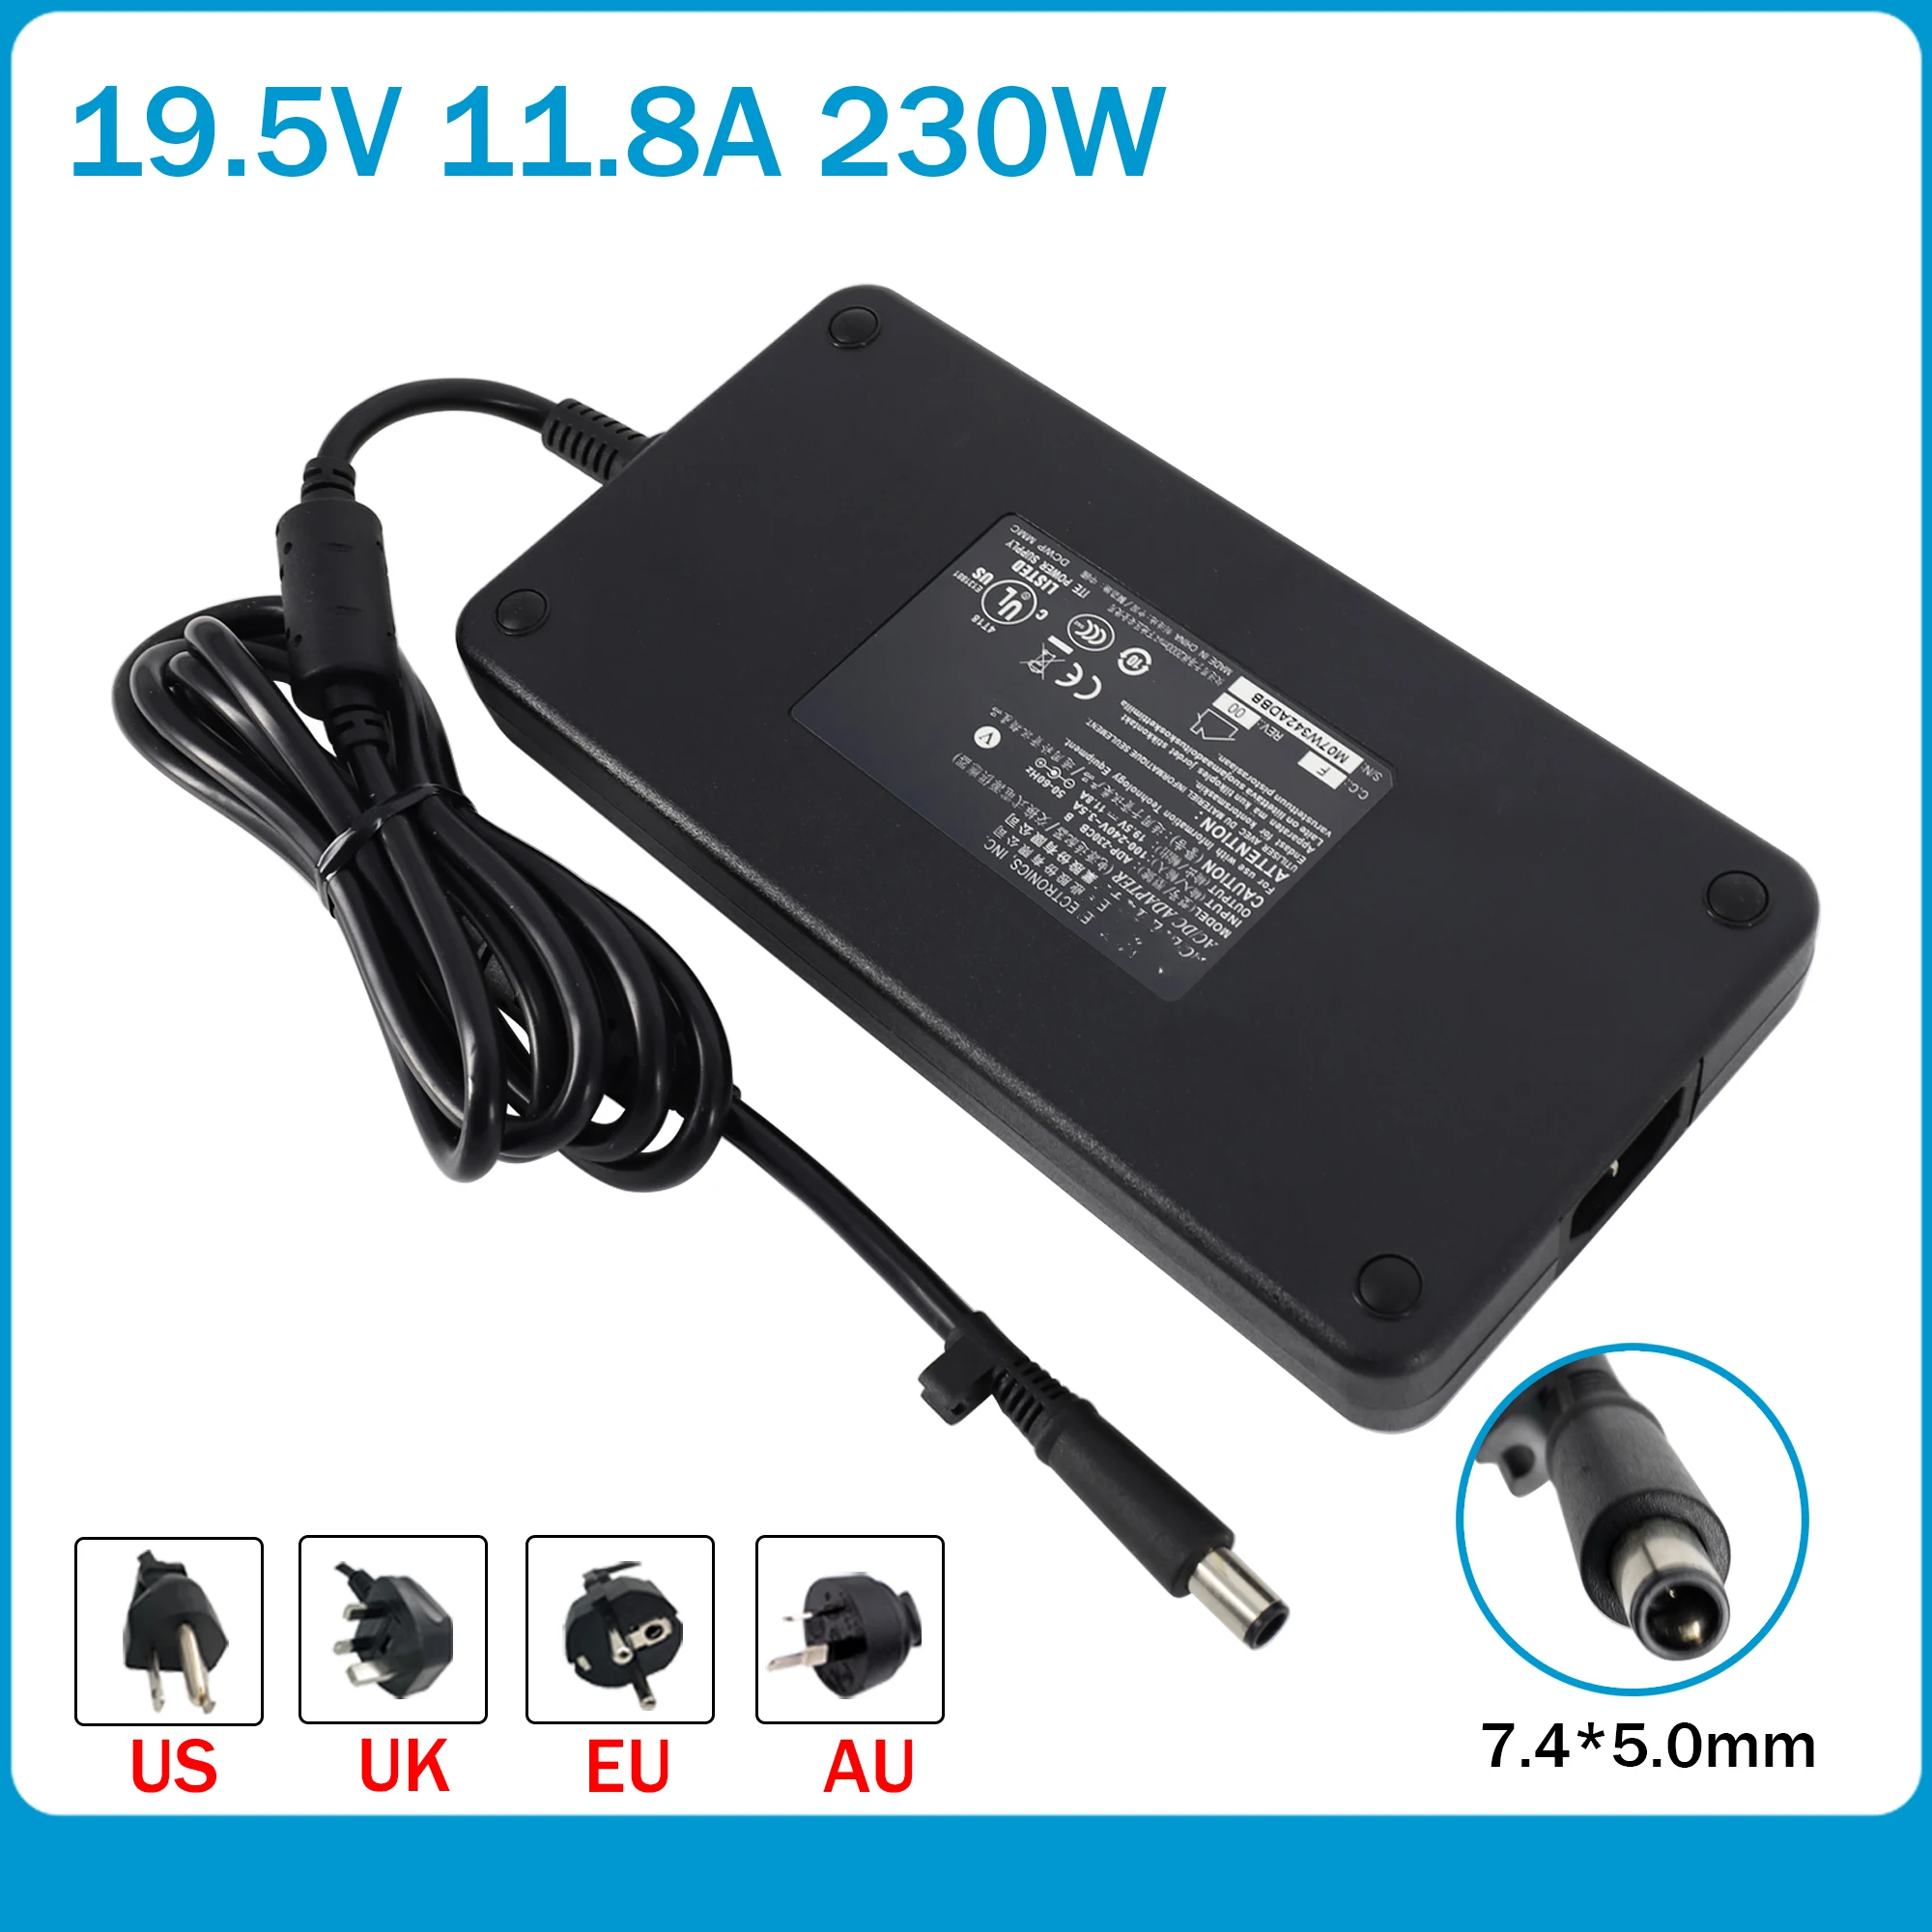 Genuine 19.5V 11.8A 230W ac power adapter ADP-230EB T ADP-230CB B for MSI GT72 WT72 MS-1781GT80 MS-1812